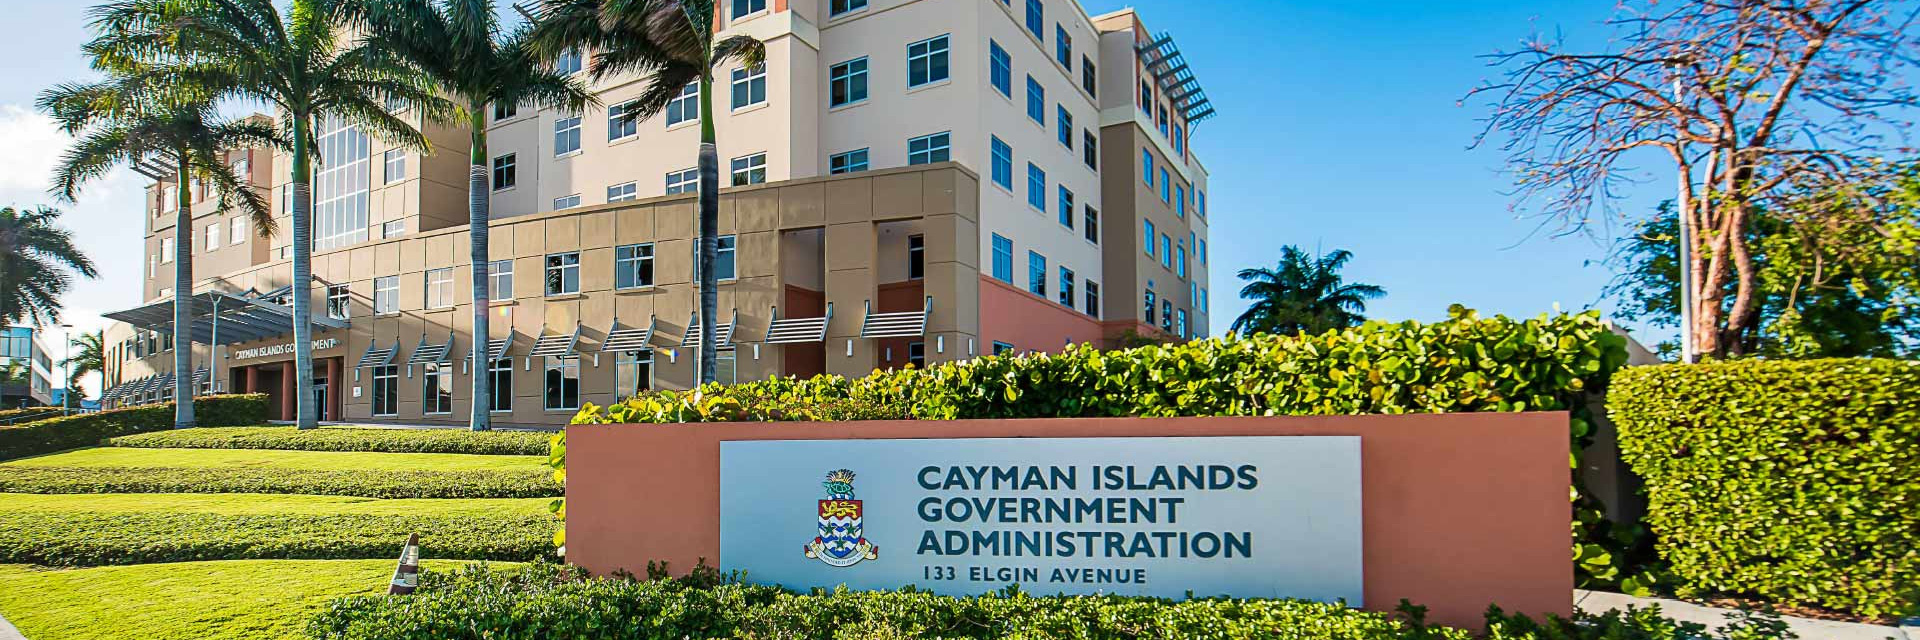 Capability development with the Cayman Islands Government